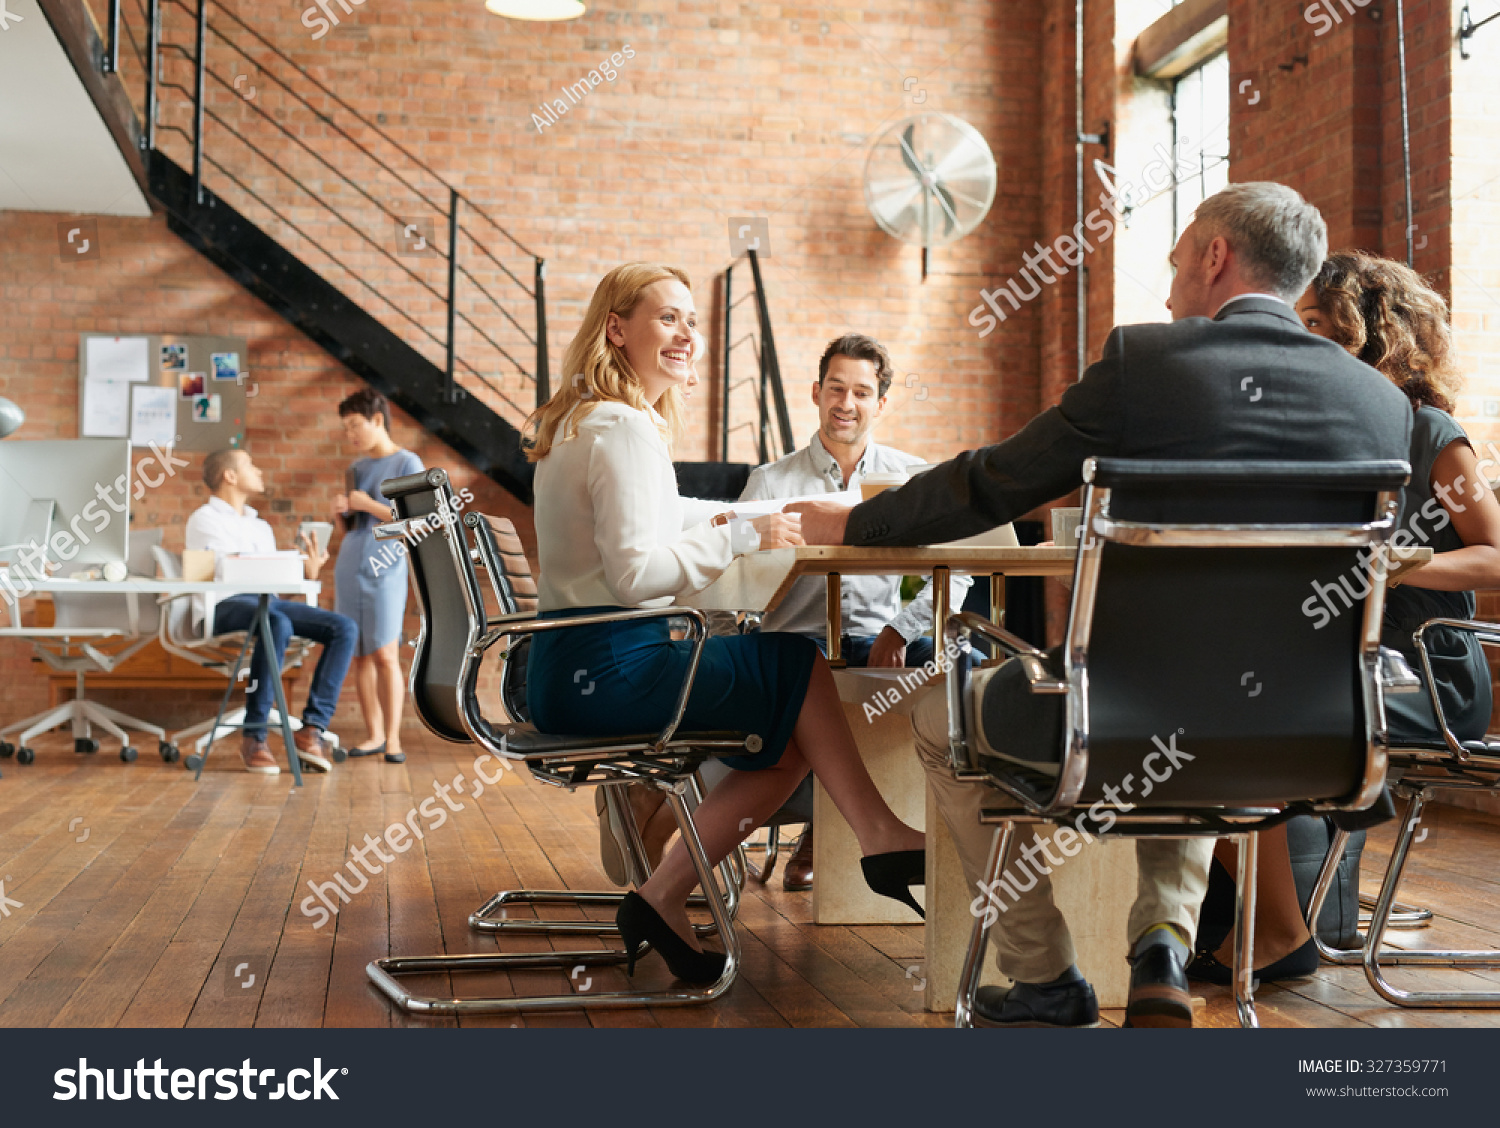 Exciting boardroom meeting with business people in trendy office space #327359771